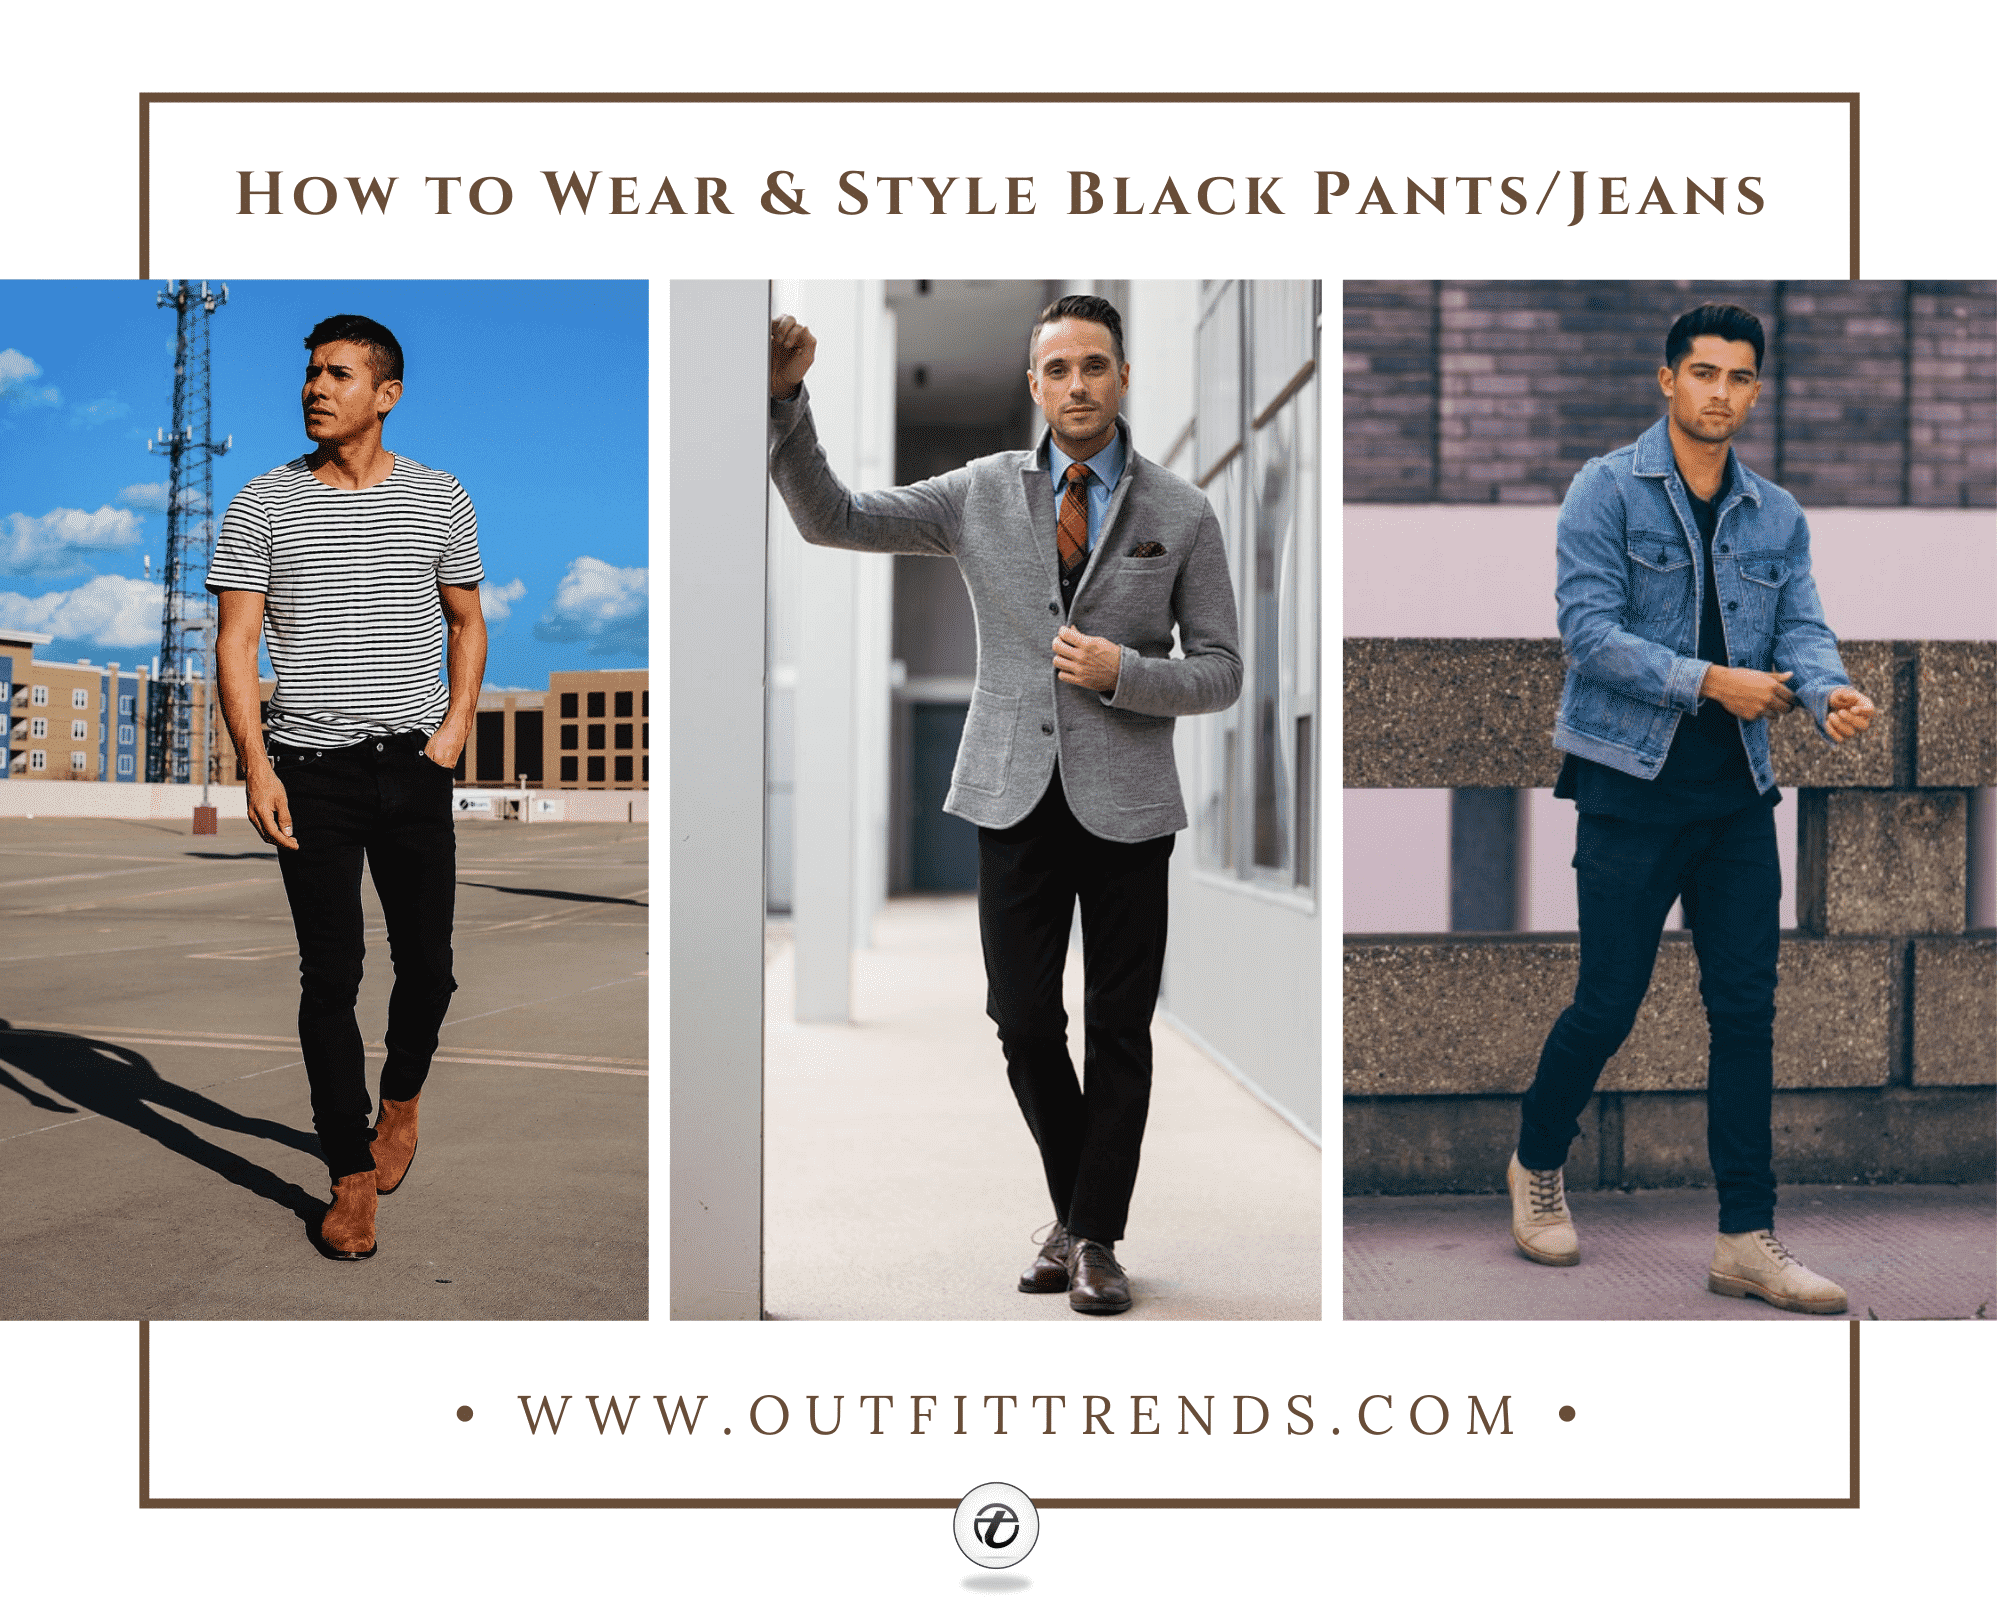 Guys Black Pants Outfits 41 Ways To Wear Black Pants/Jeans